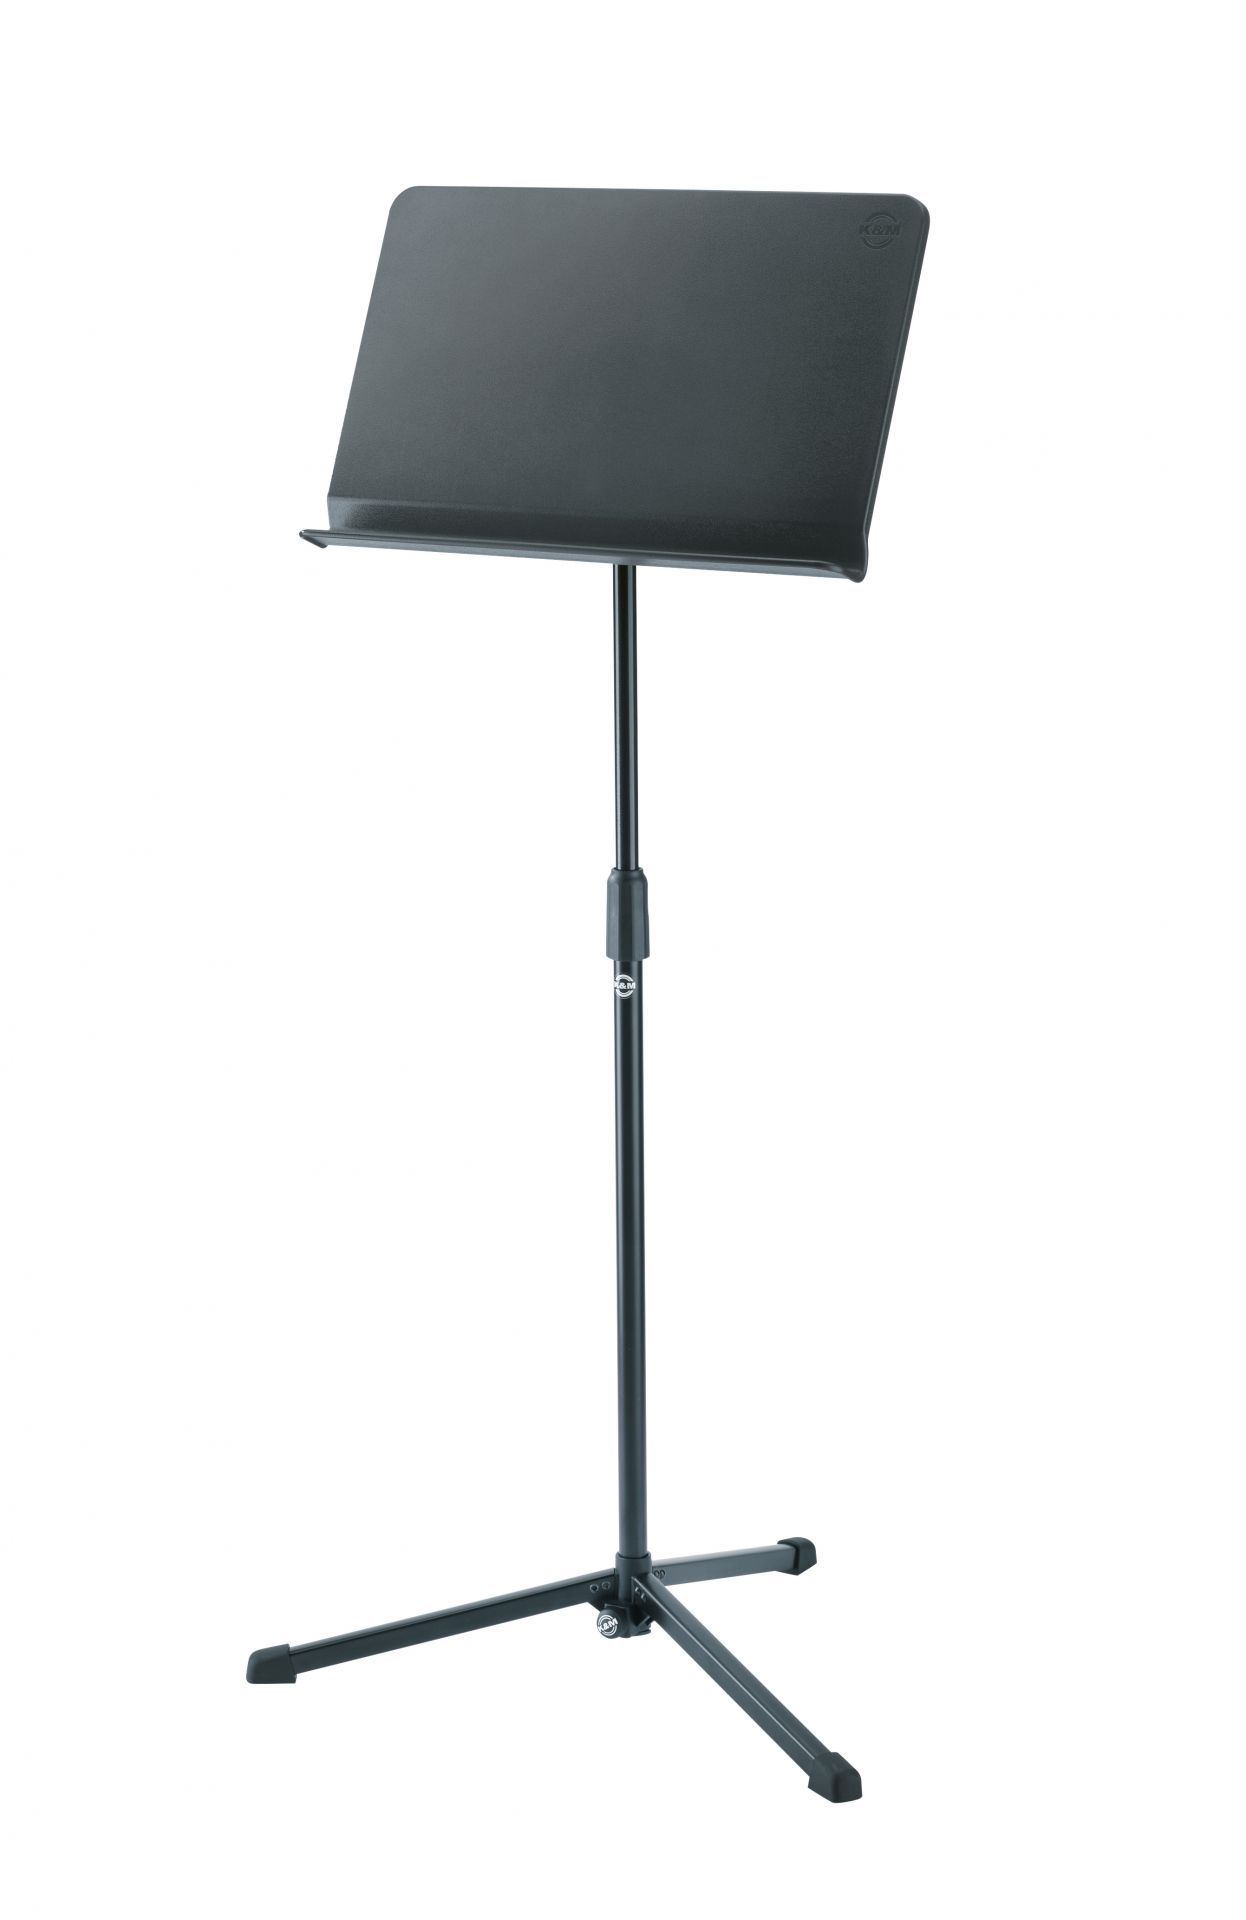 K&M Orchestra music stand 11923-000-55